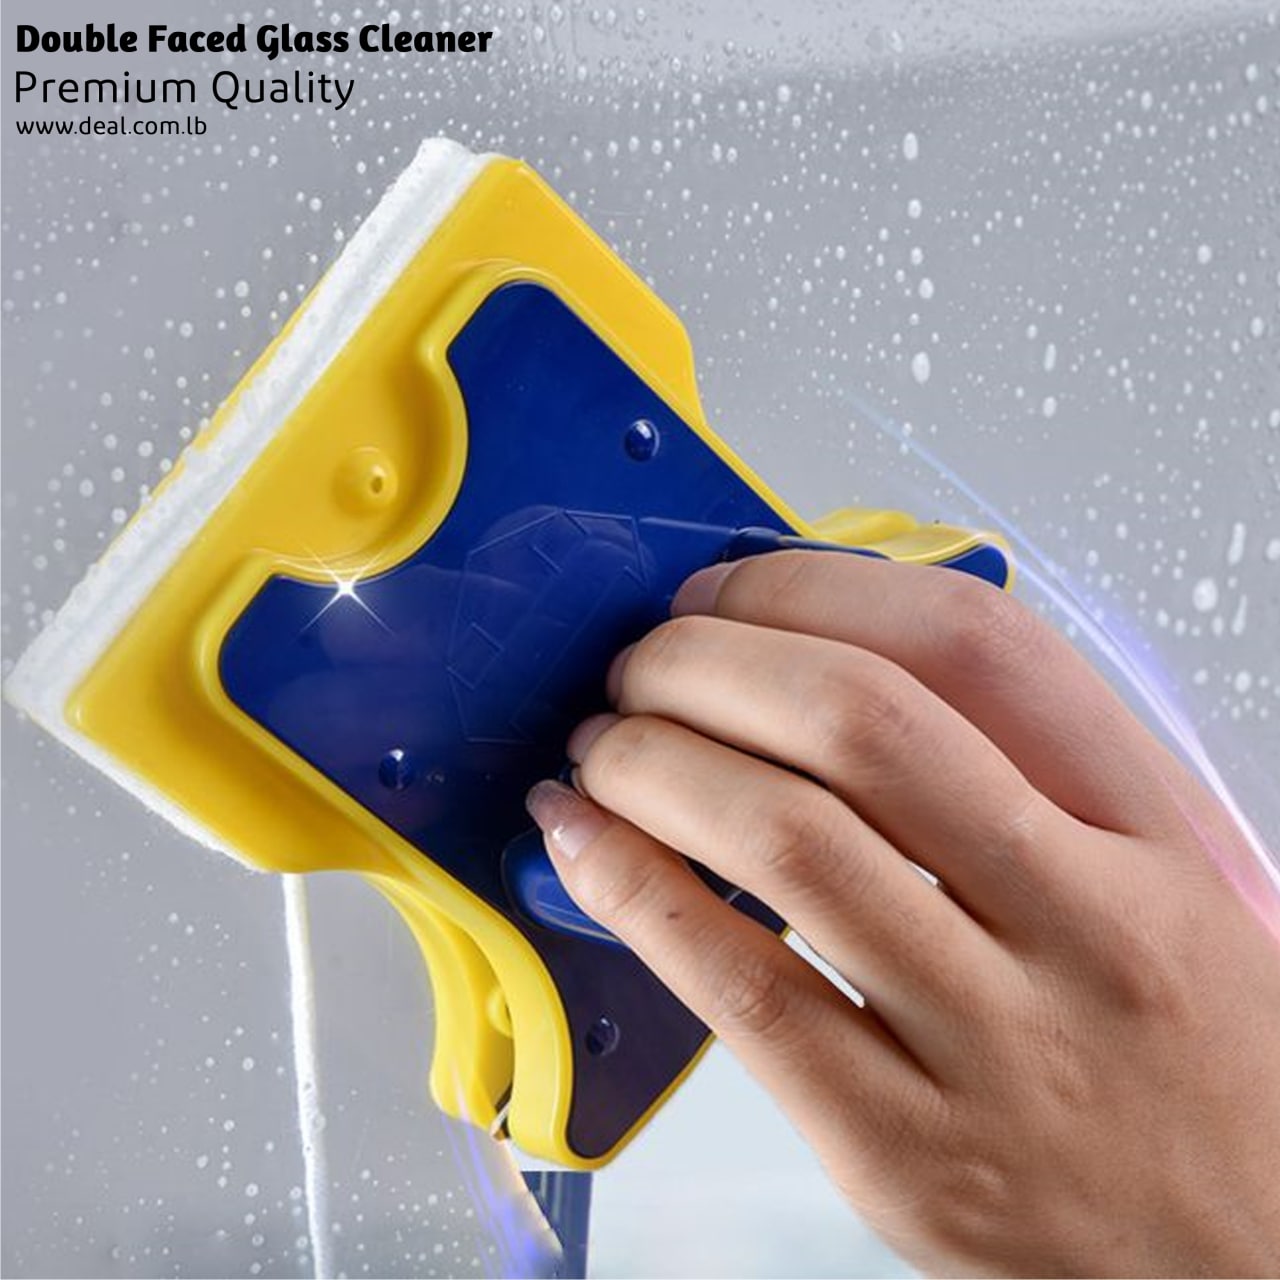 Double Faced Glass Cleaner